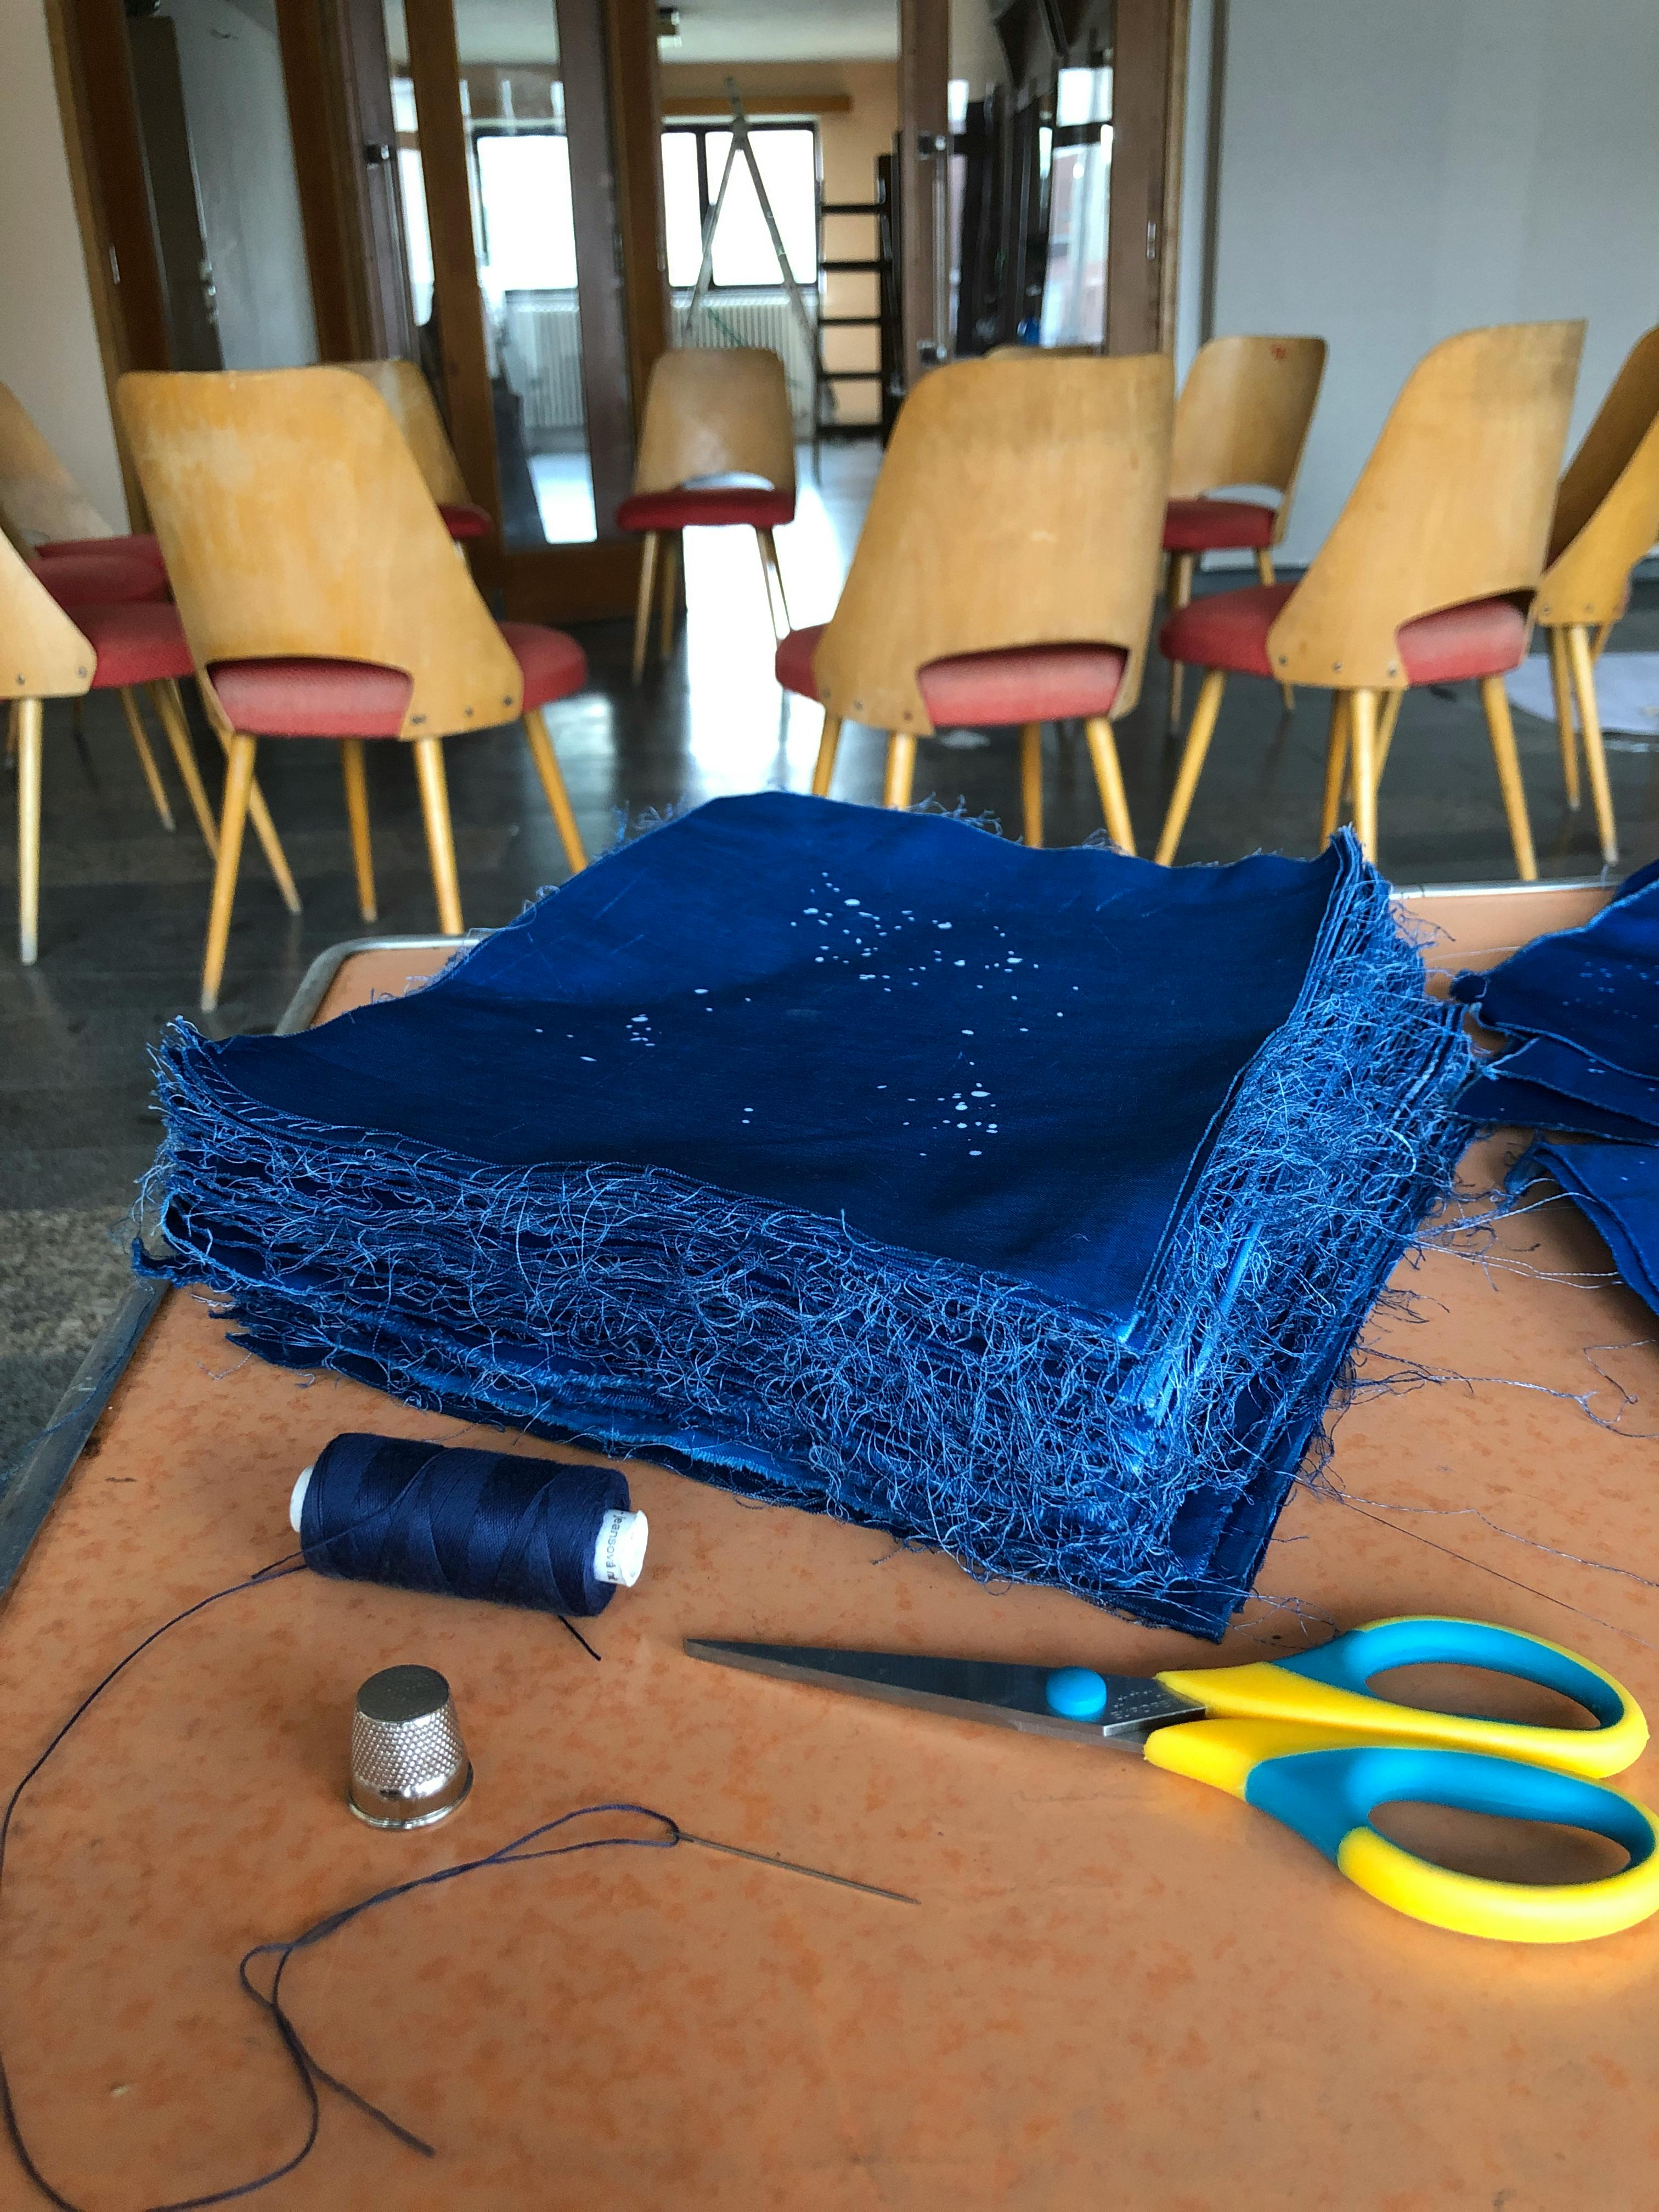 stack of dark blue fabric patches with white specks on a table with sciccors and thread